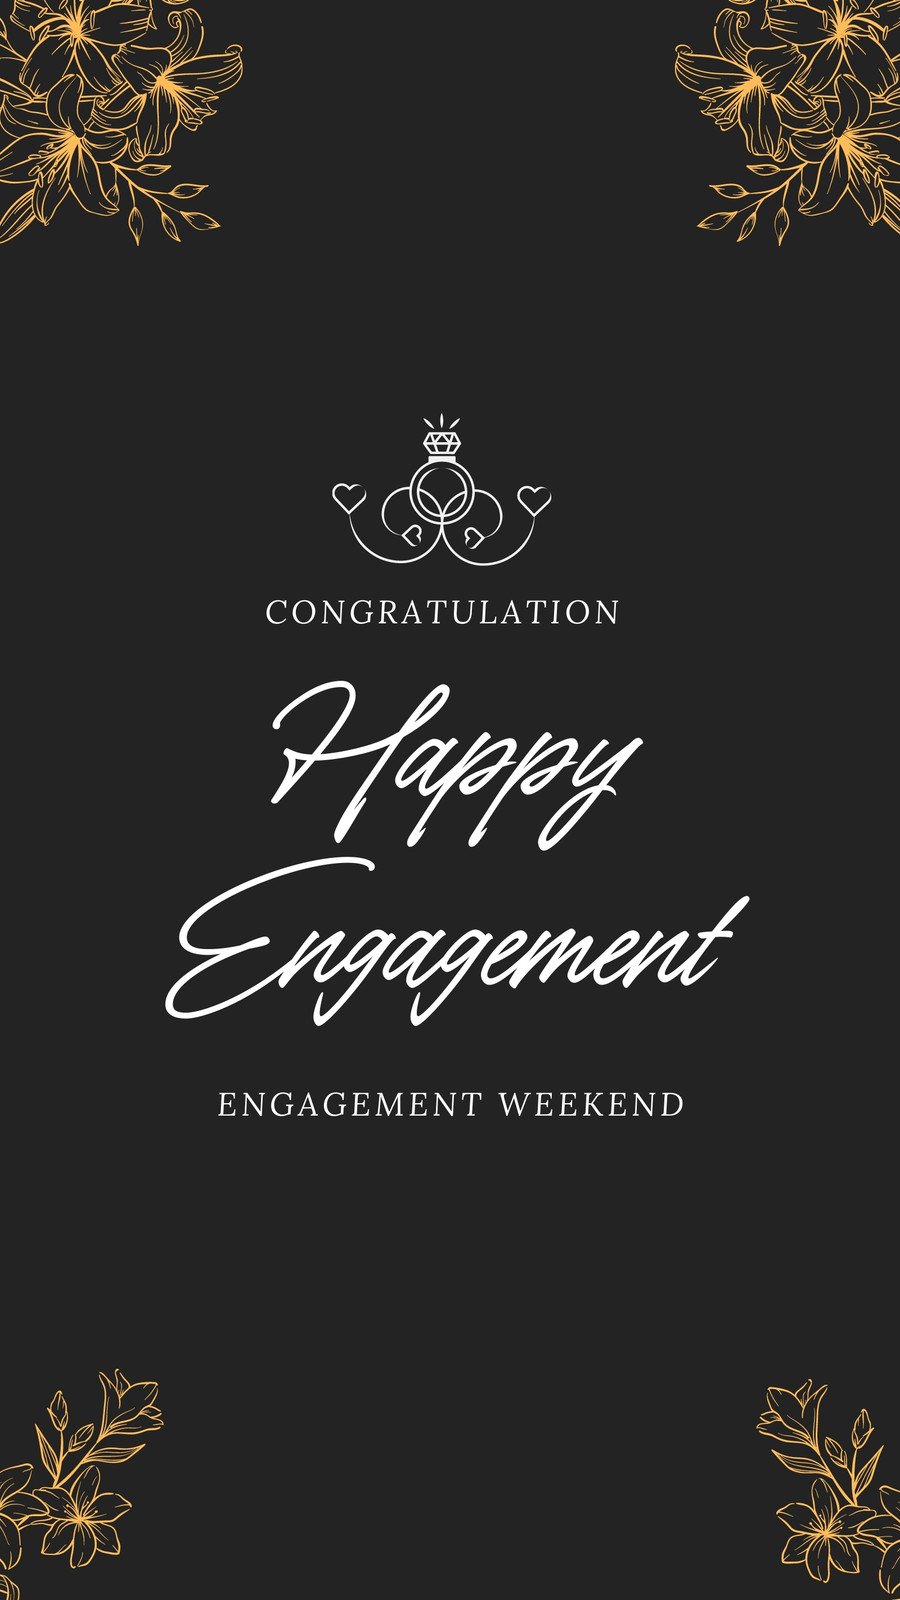 Page 4 - Free and customizable engagement templates